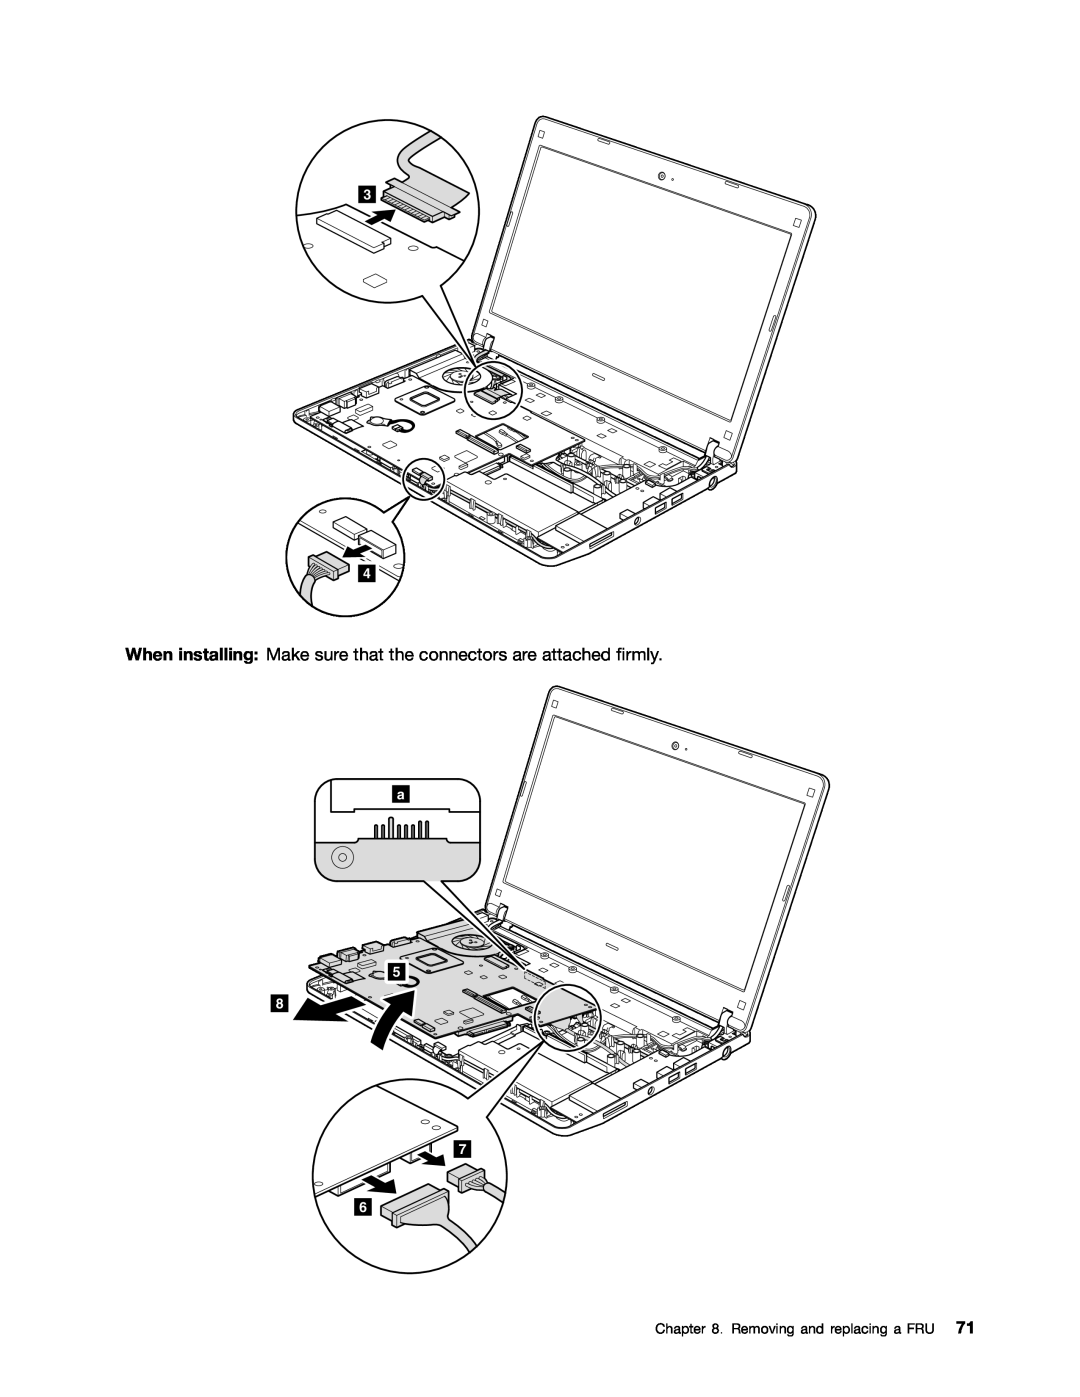 Lenovo EDGE 13, E31, E30 manual When installing Make sure that the connectors are attached firmly 